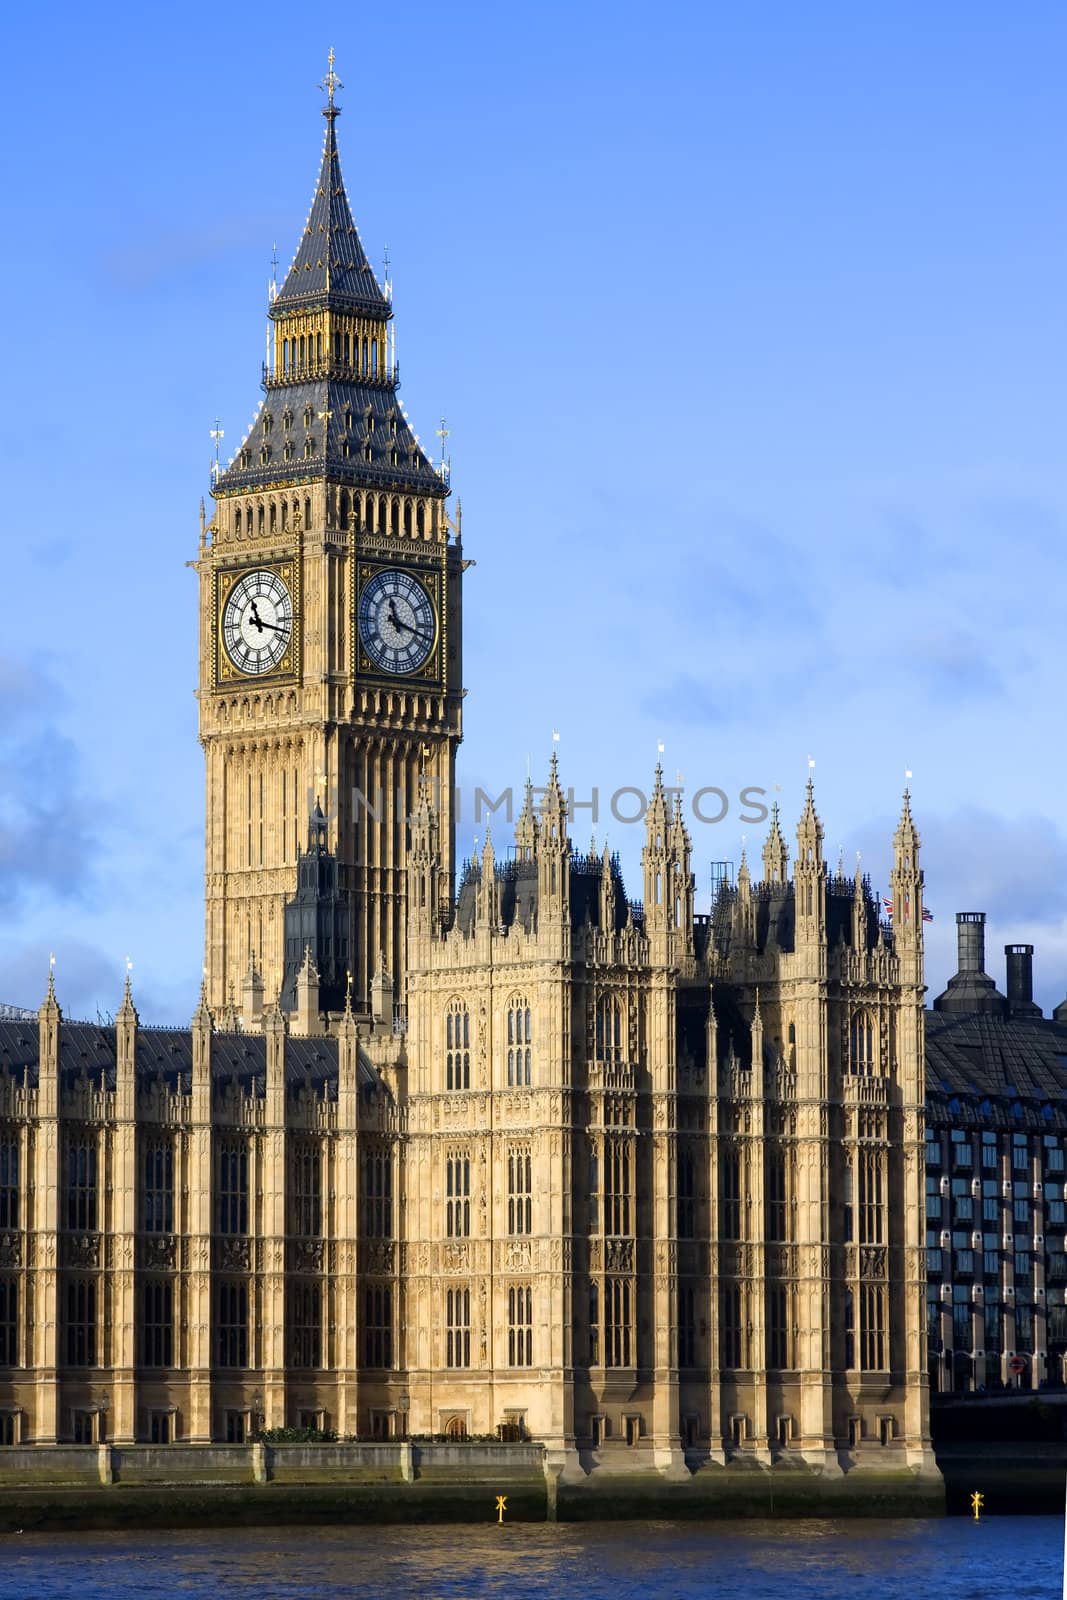 An evening shot of the Palace of Westminster, Big Ben and the River Thames, London England against a blue sky